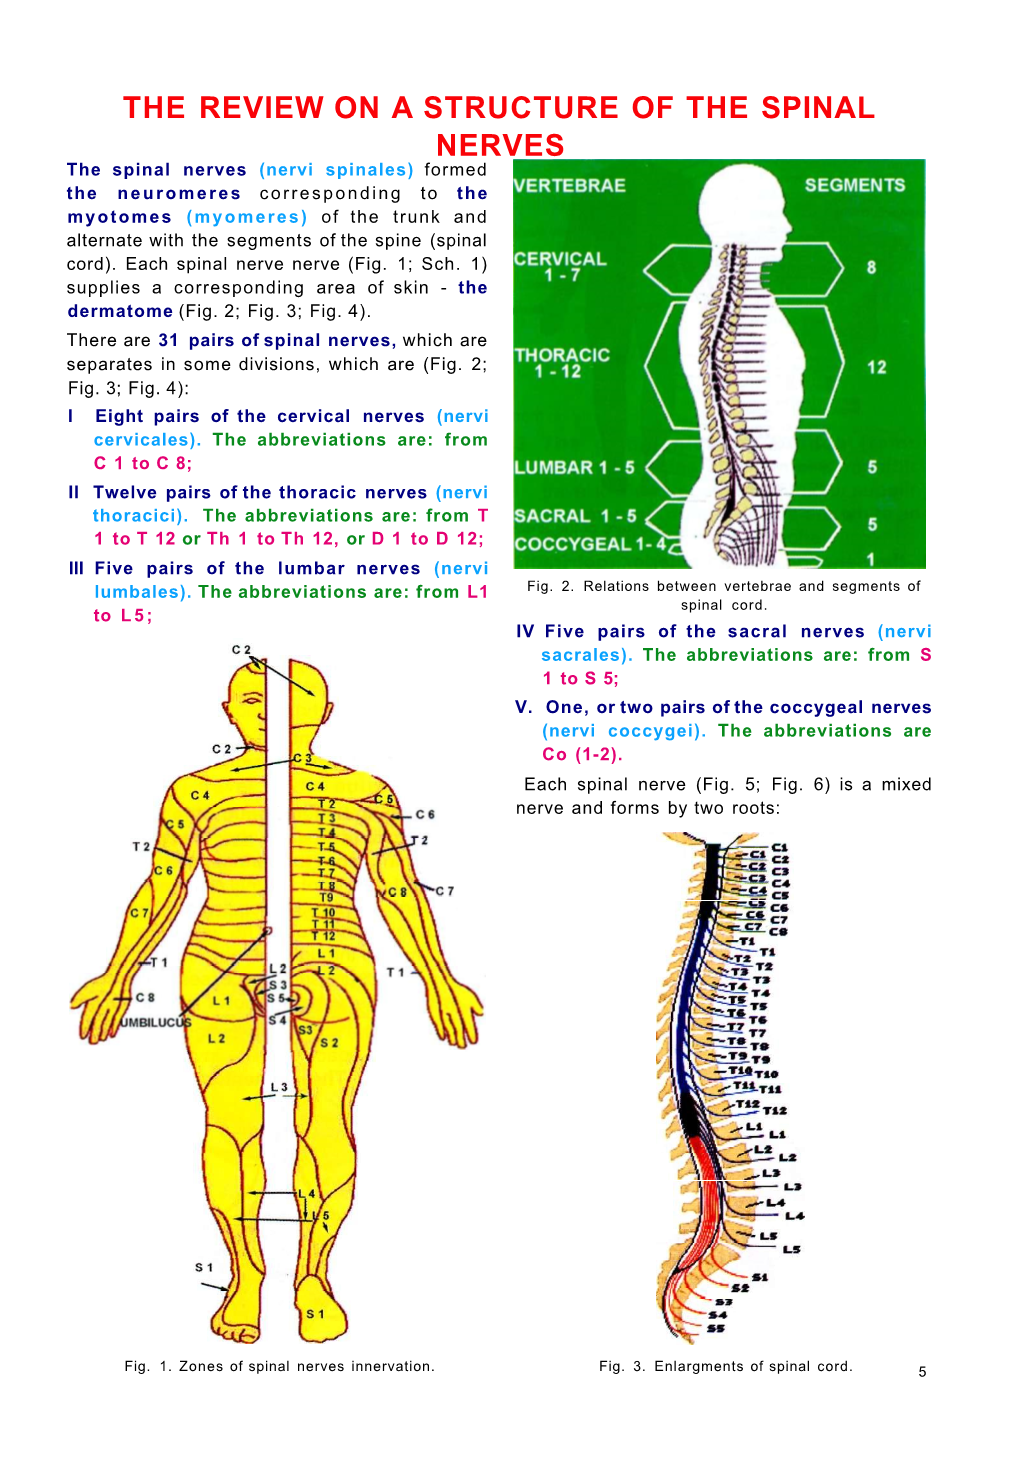 The Review on a Structure of the Spinal Nerves